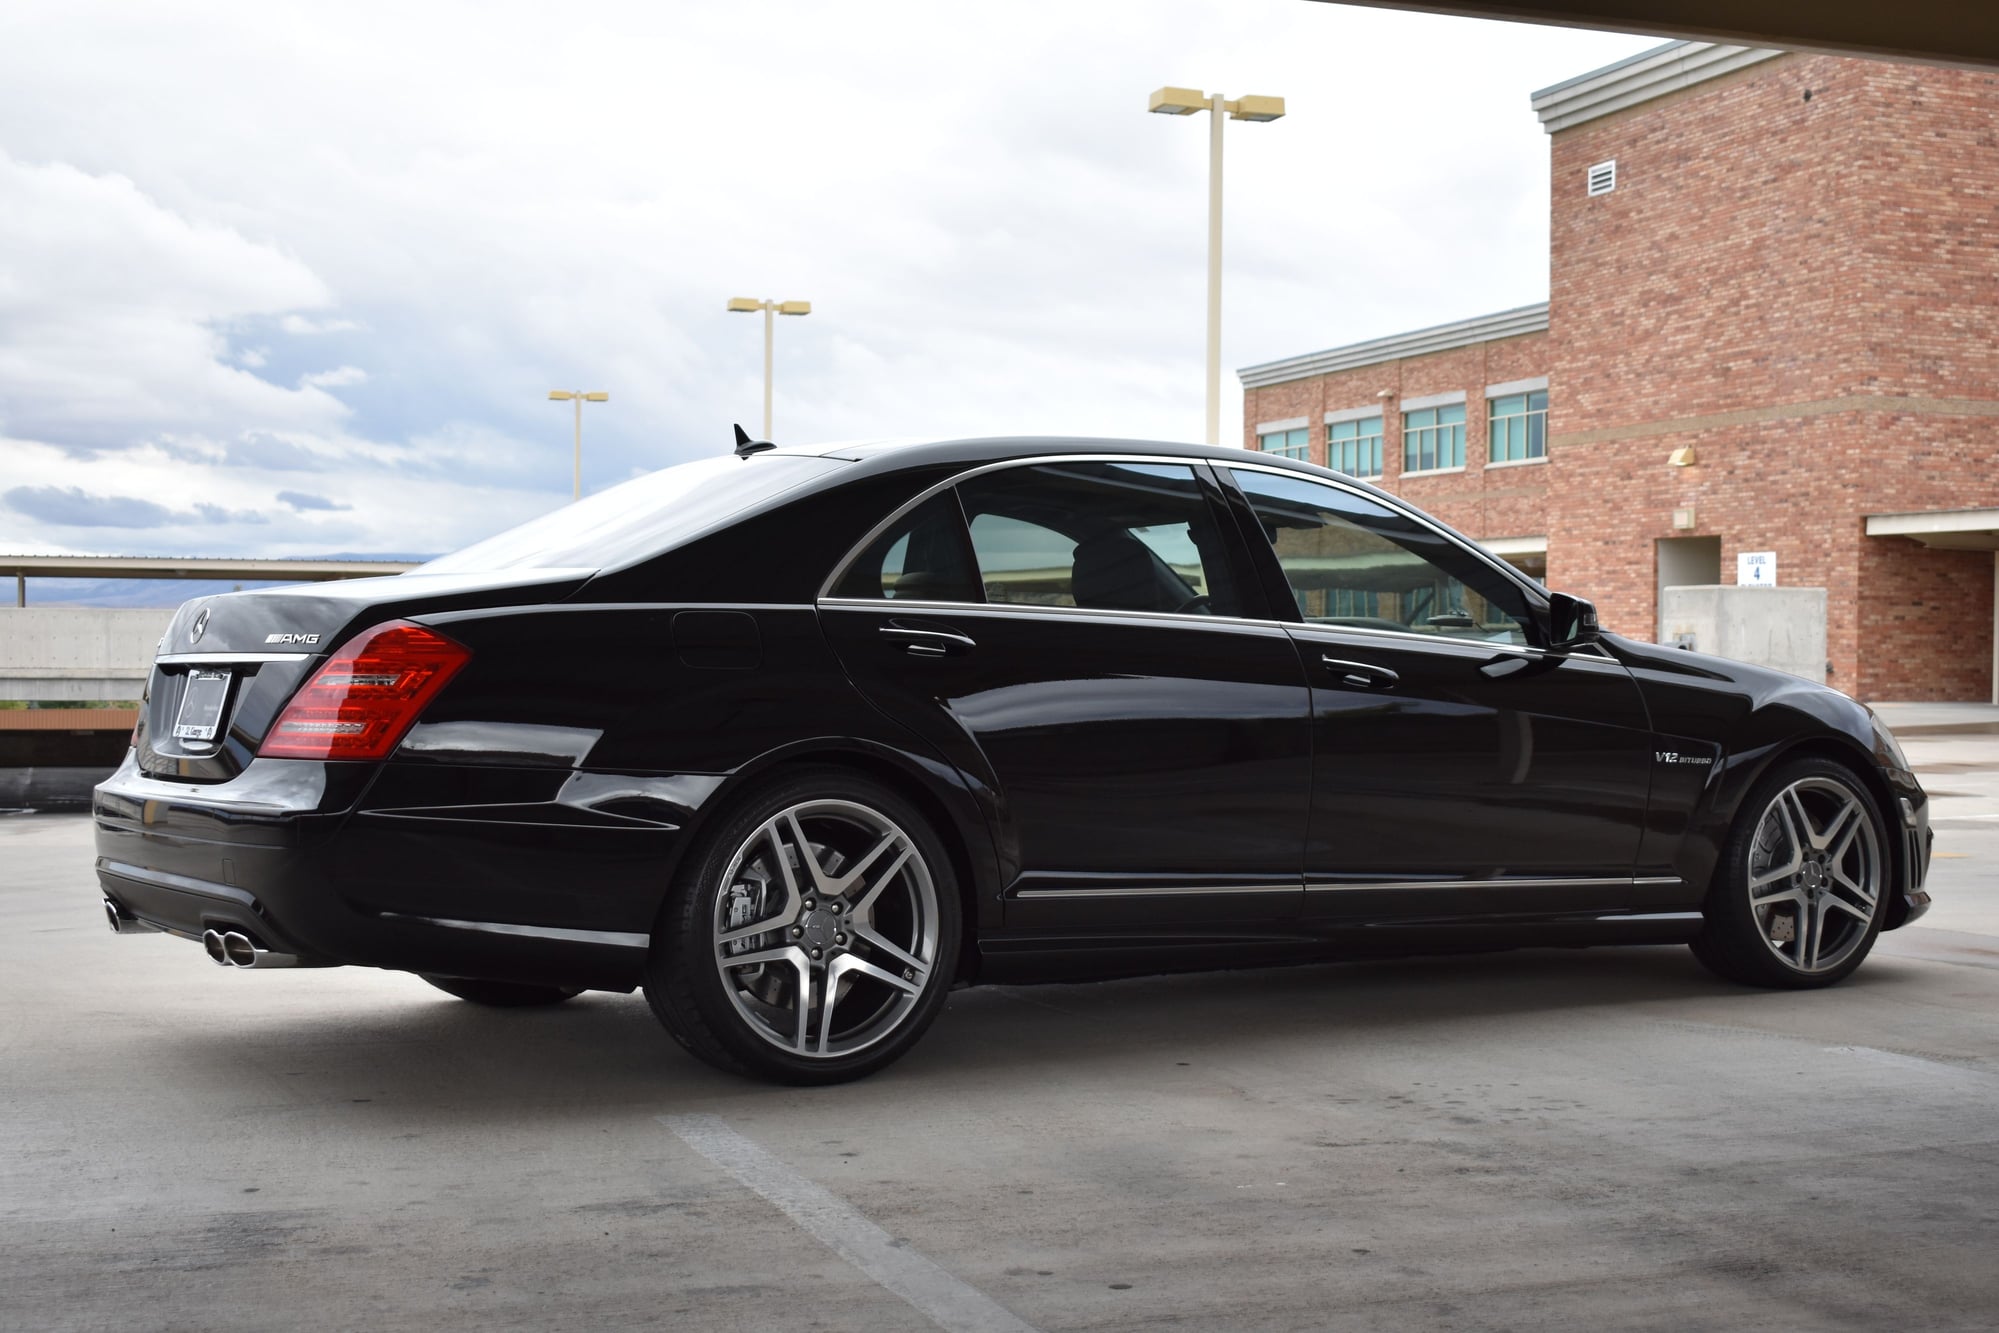 2007 Mercedes-Benz S65 AMG - 2007 Mercedes S65 AMG, immaculately well kept, lots of service records - Used - VIN WDDNG79X97A124434 - 115,000 Miles - 12 cyl - 2WD - Automatic - Sedan - Black - St. George, UT 84770, United States